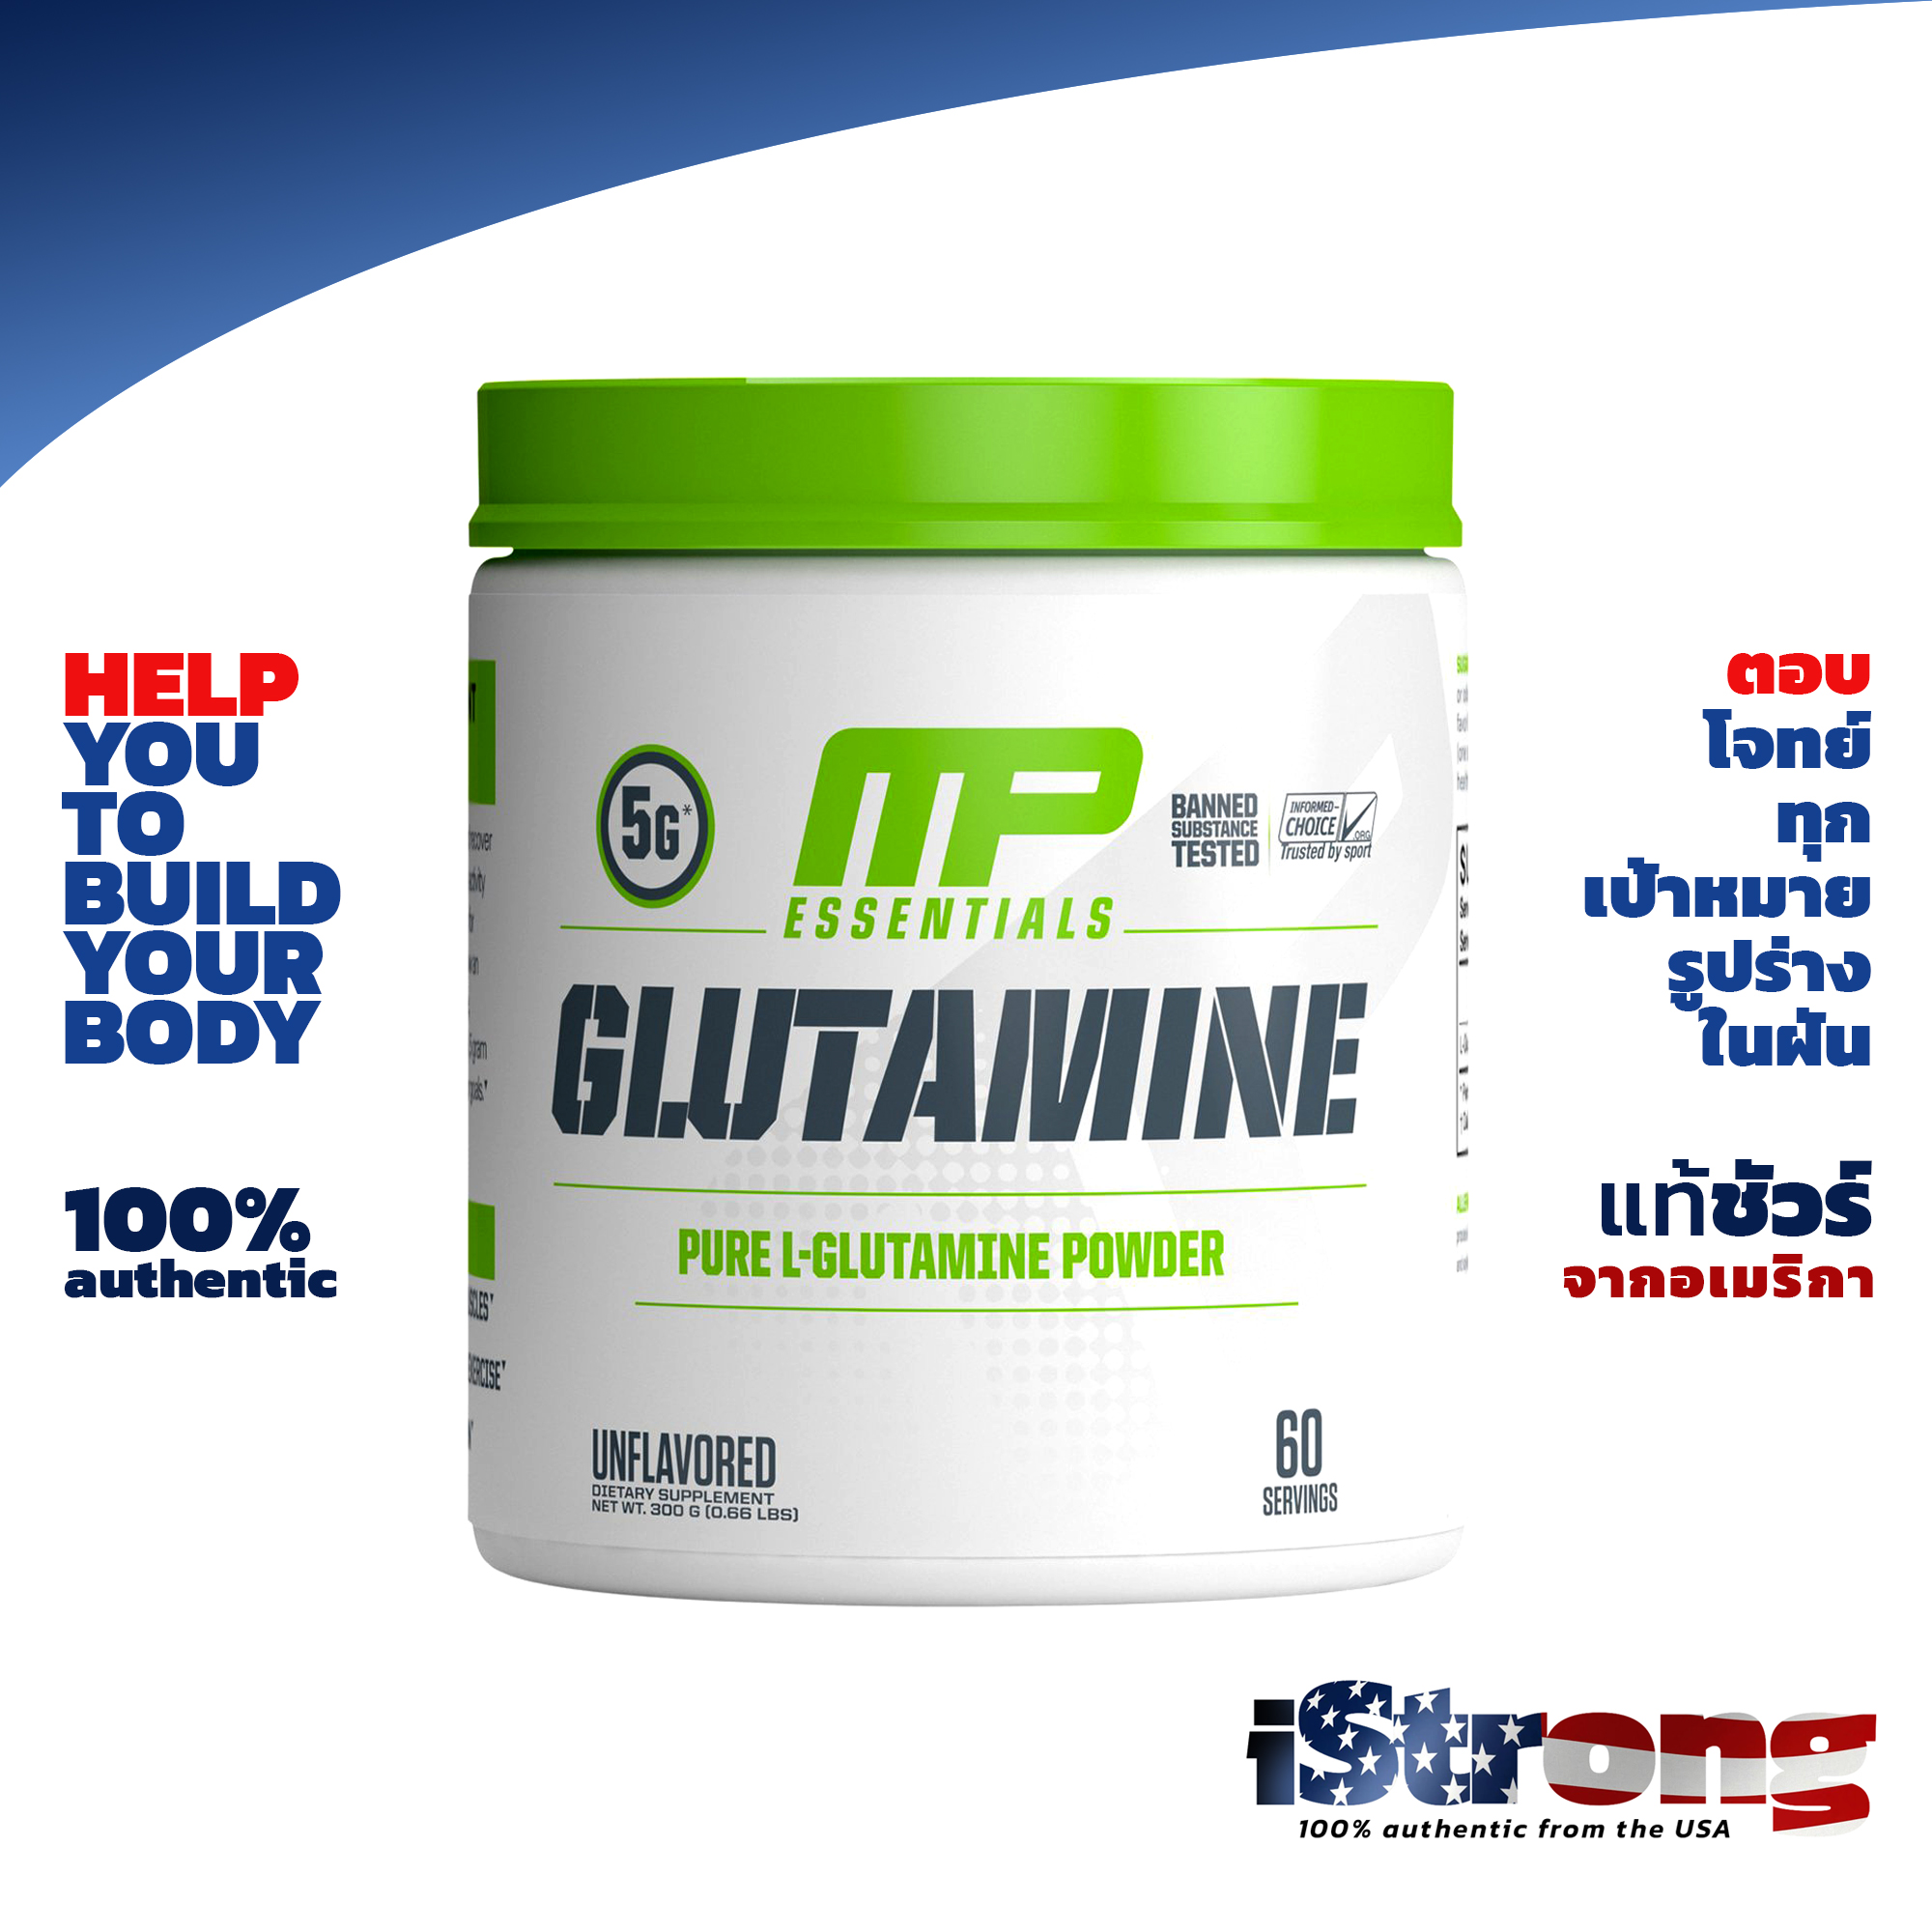 MusclePharm Pure L-Glutamine Powder 60 servings (300g)ช่วยสร้างกล้ามเนื้อ เร่งฟื้นตัว Enhance Muscle Growth And Increase Recovery Time